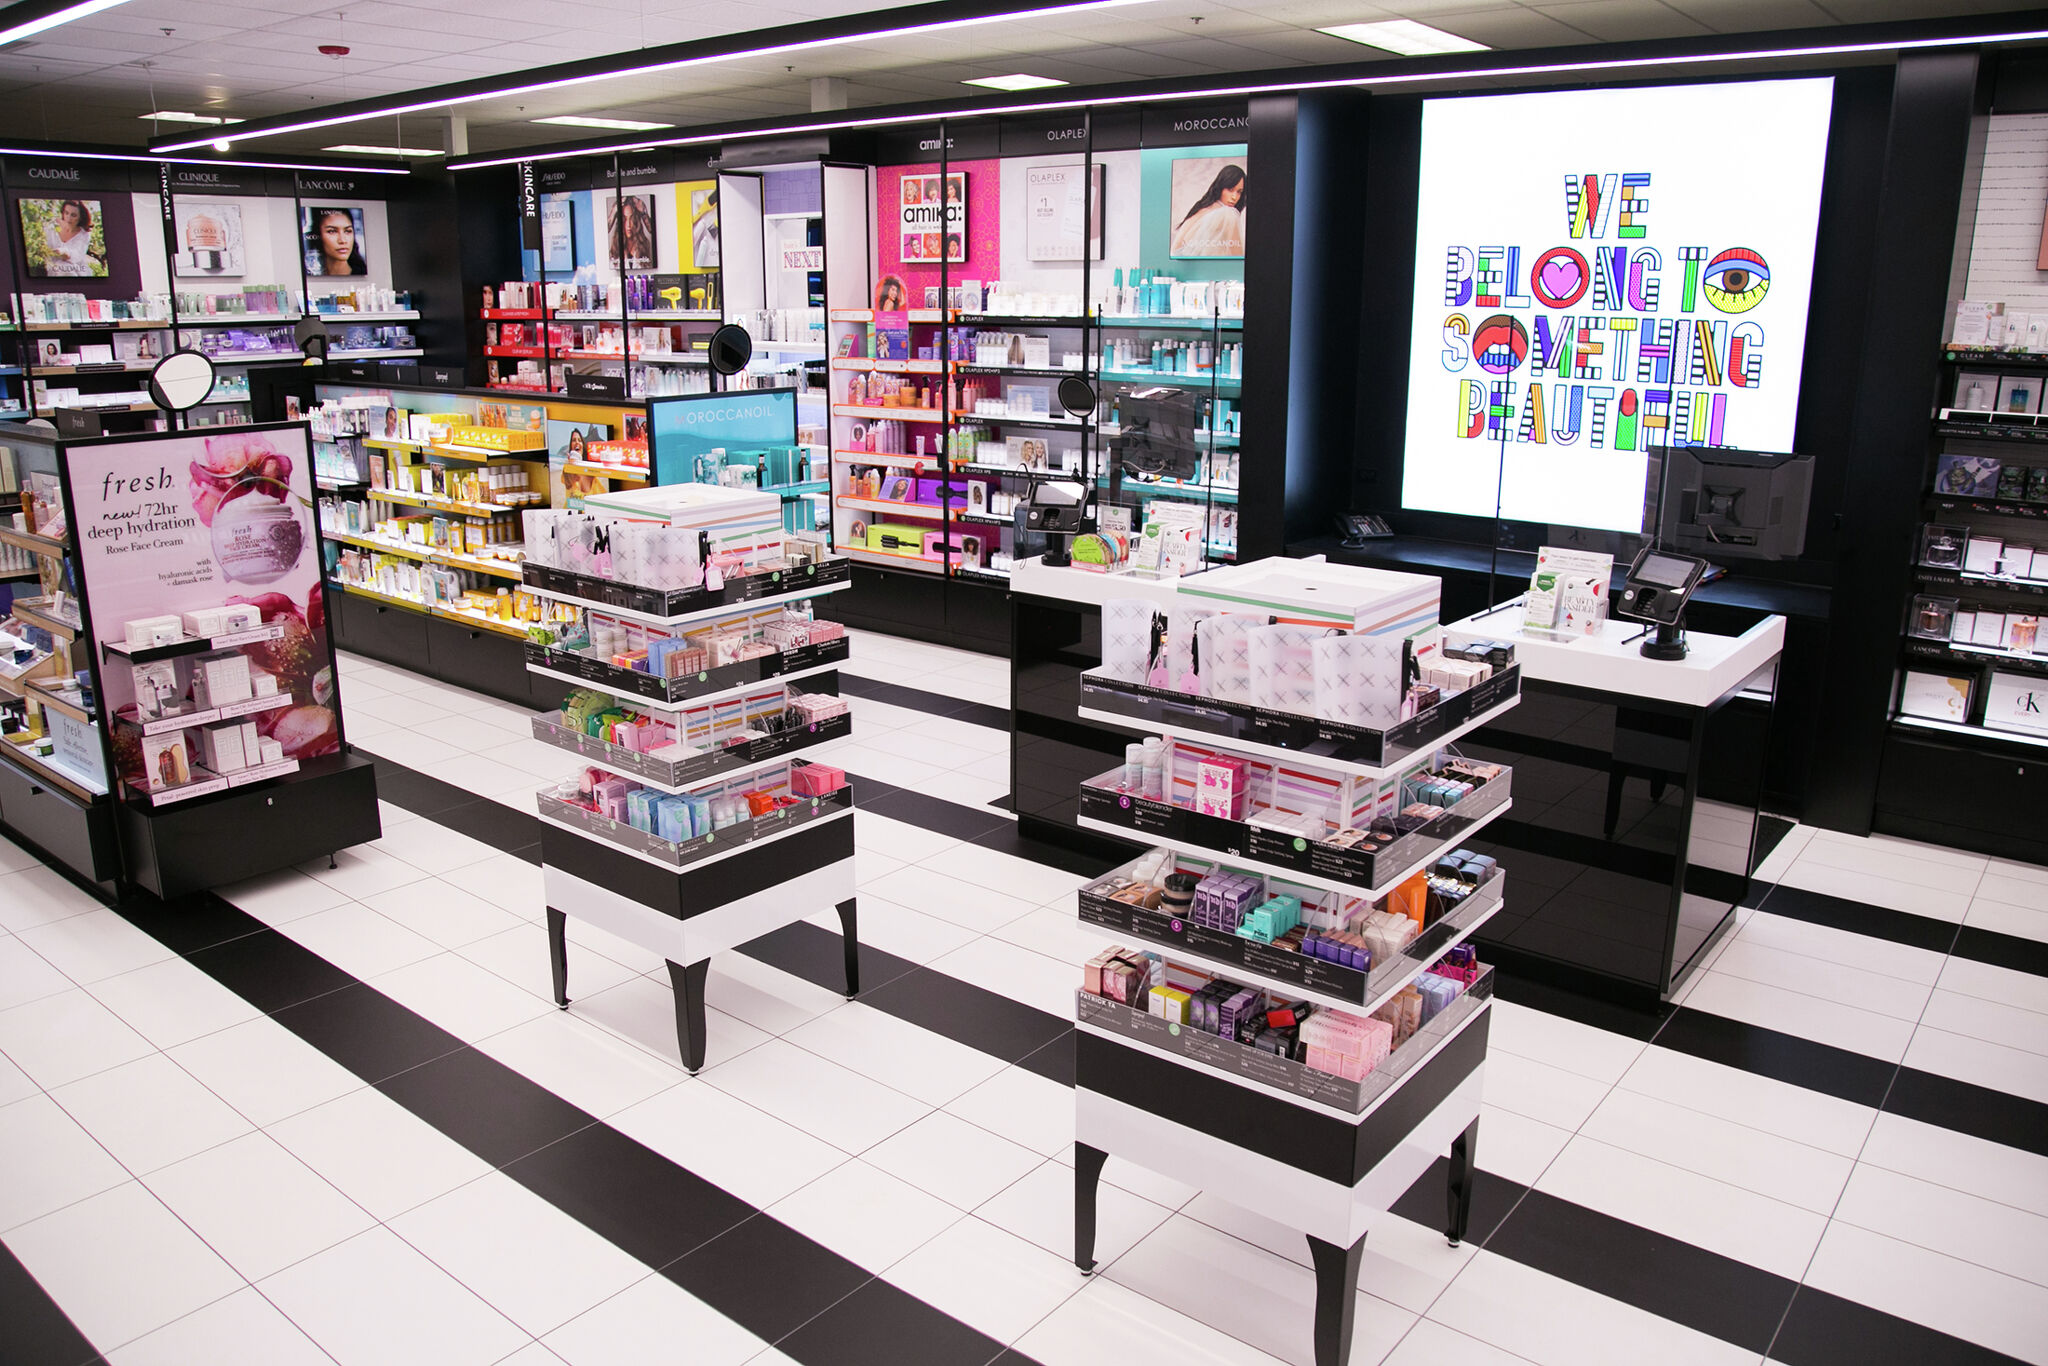 Sephora opens in Lutz and Lakeland Kohl's stores